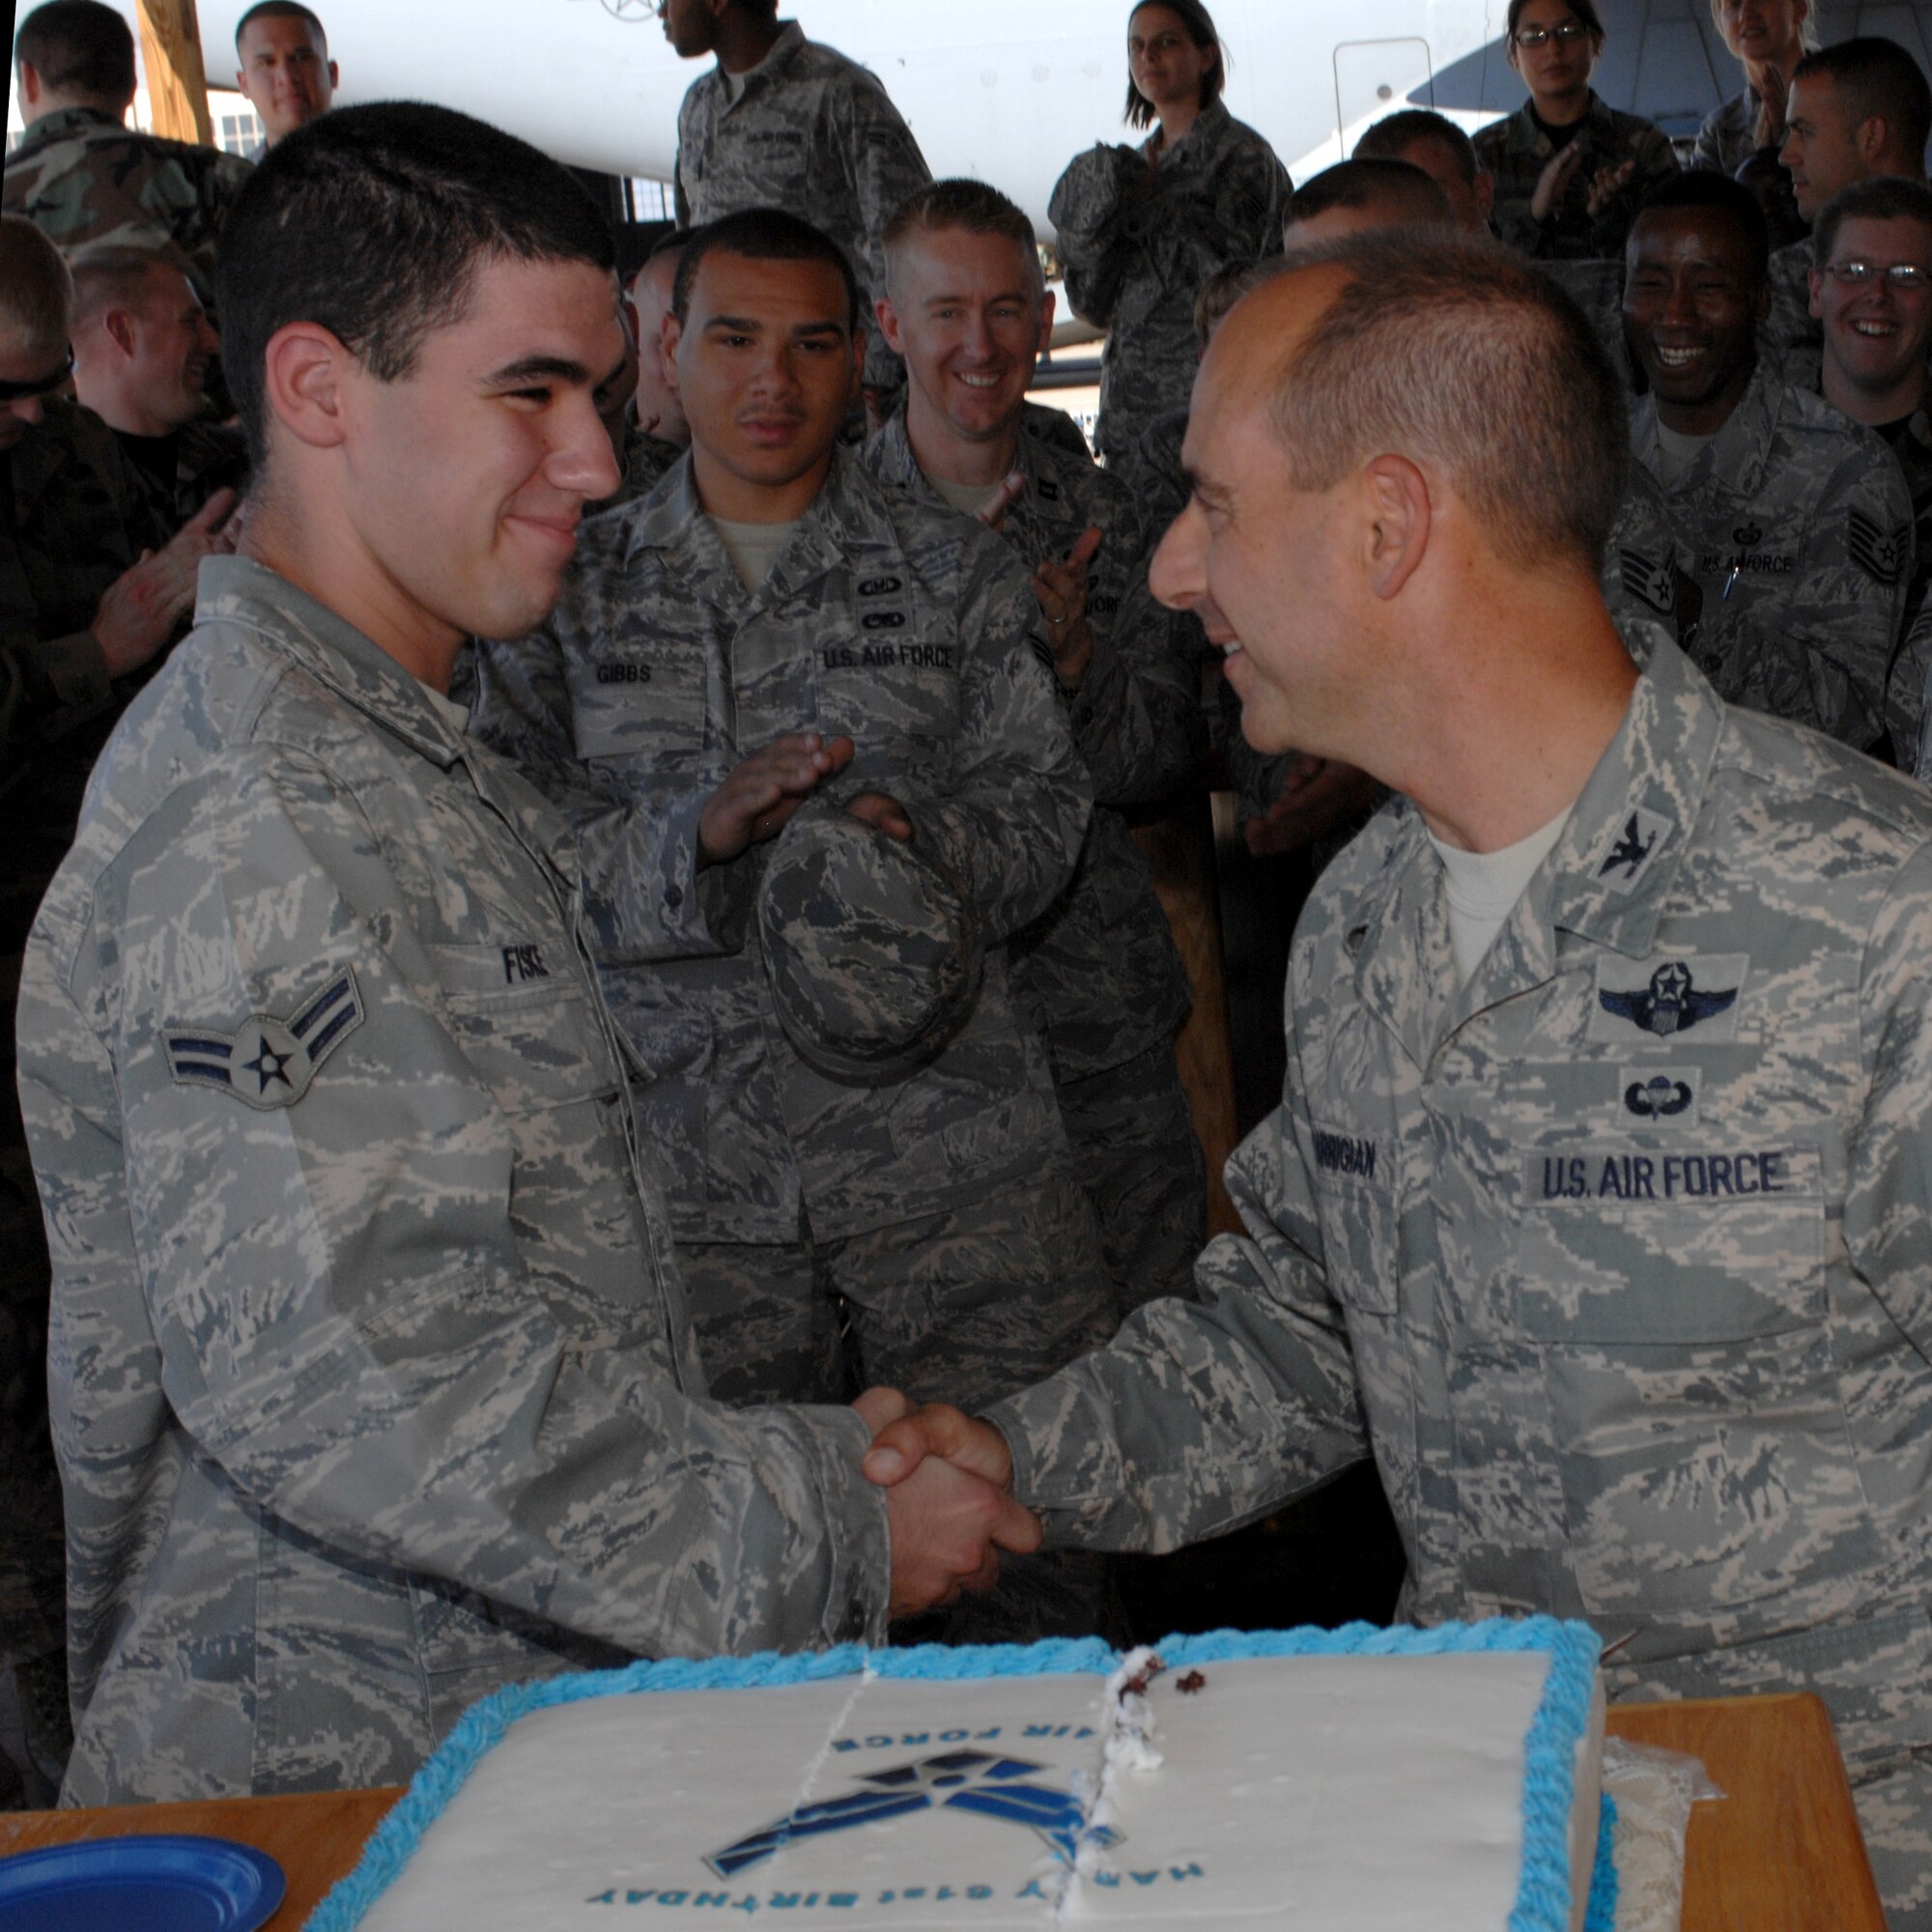 Col. Jeff Harrigian, 49th Fighter Wing commander, shakes the hand of Airman 1st Class Joshua Fiske, 49th Operations Support Squadron, after cutting the birthday cake at the Air Force birthday celebration outside the 7th Fighter Squadron at Holloman Air Force Base, N.M., September 16. Airman Fiske was chosen to cut the cake with the colonel as he is the youngest member of the 49 OSS. The cake was in honor of the Air Force?s 61st Birthday. (U.S. Air Force photo/Airman Sondra M. Escutia)